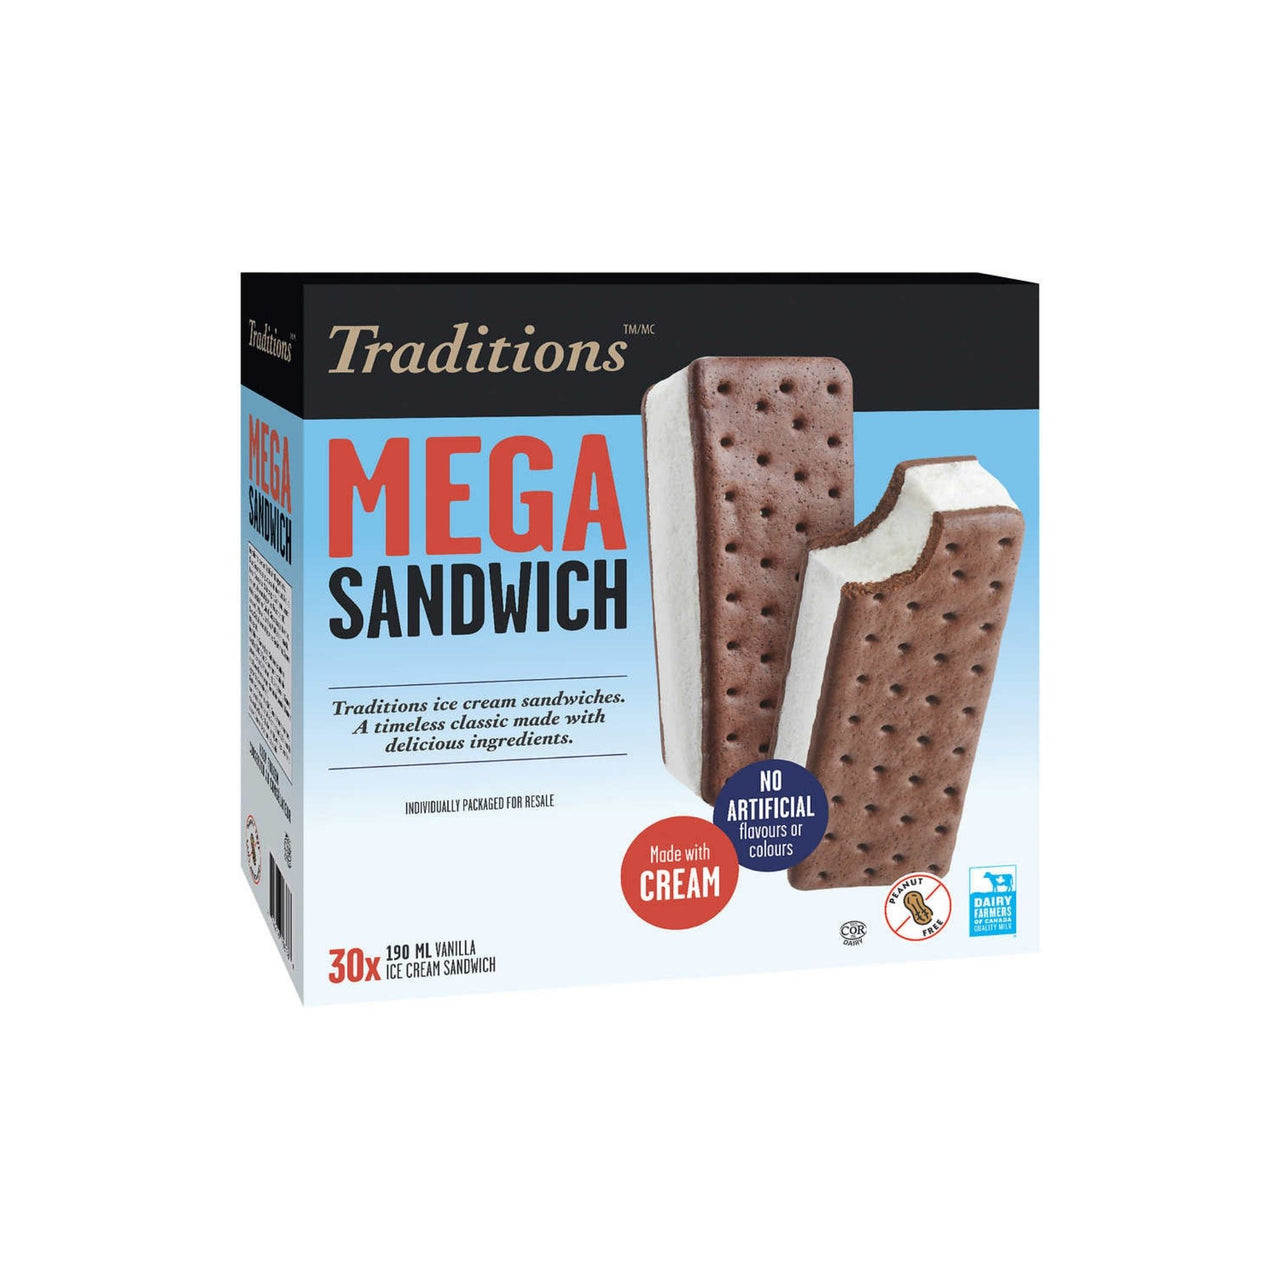 Image of Traditions Mega Sandwich Ice Cream Sandwiches (ship at your own risk)